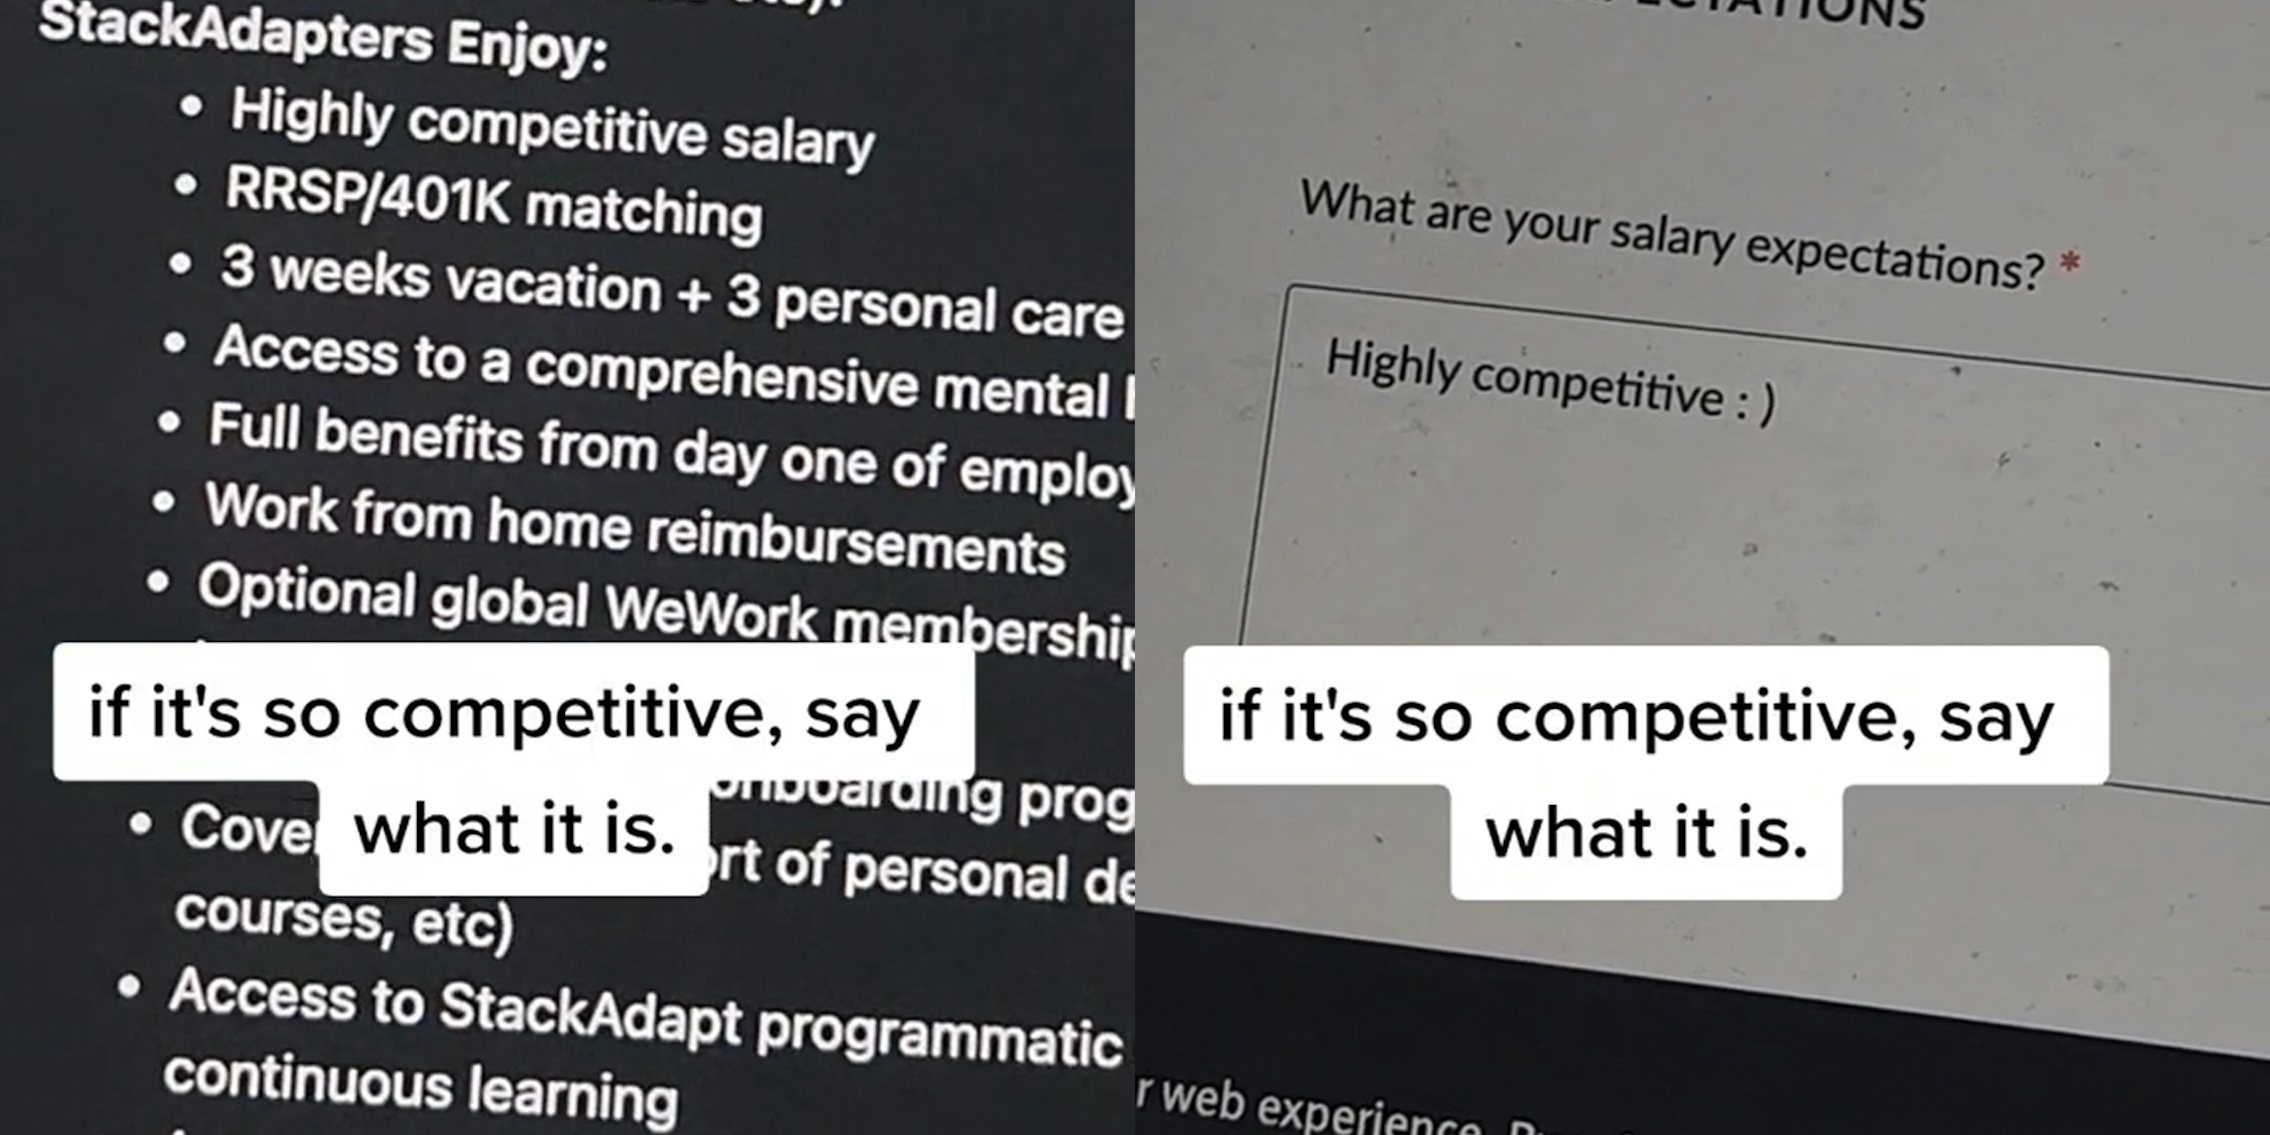 job listing with caption 'if it's so competitive, say what it is.' (l) job listing with text box 'What are your salary expectations? Highly competitive ;)' with caption 'if it's so competitive, say what it is.' (r)